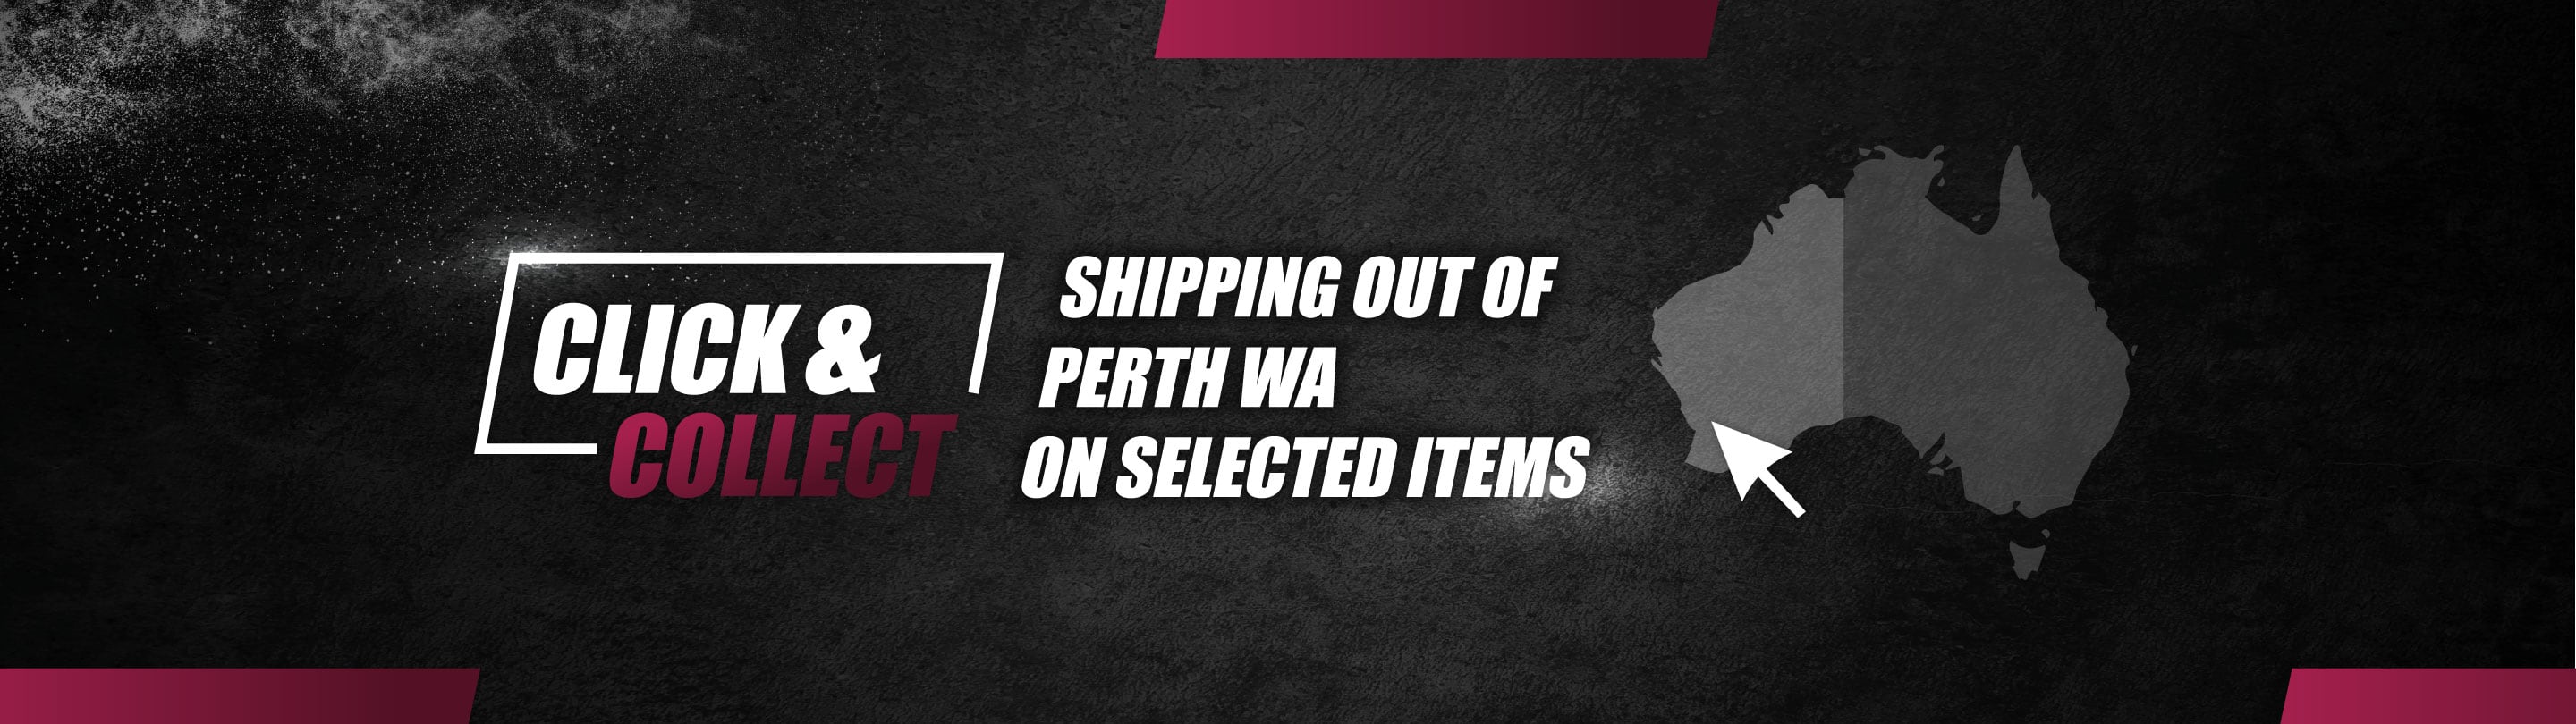 Shipping Out of Perth WA Desktop Banner